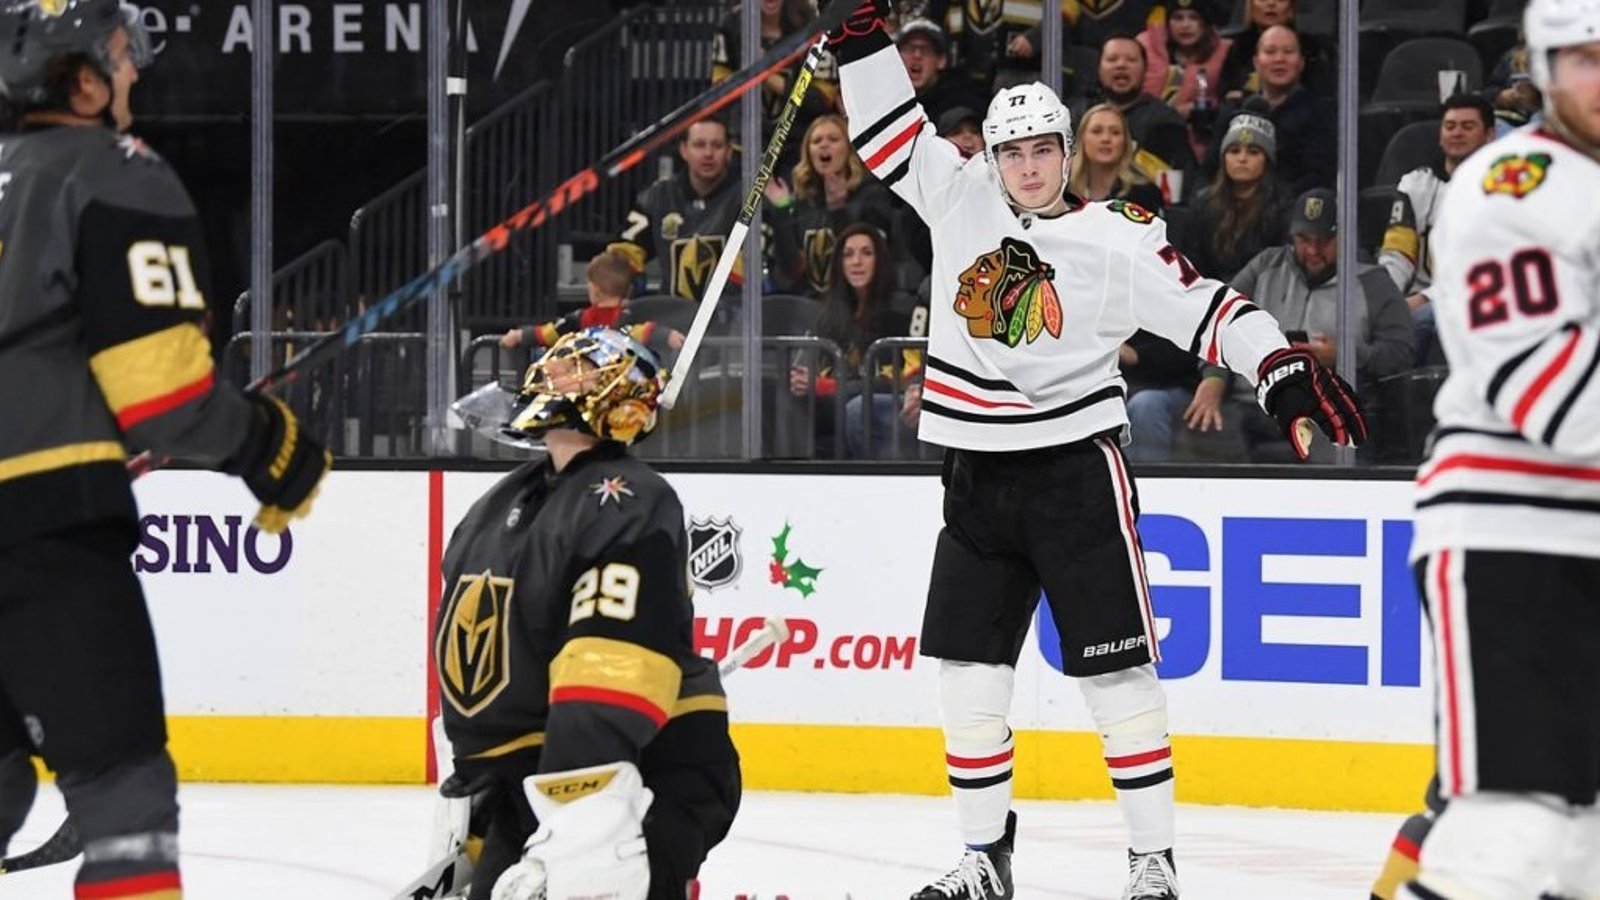 Rumor: Blackhawks will get a big boost thanks to the season stoppage.